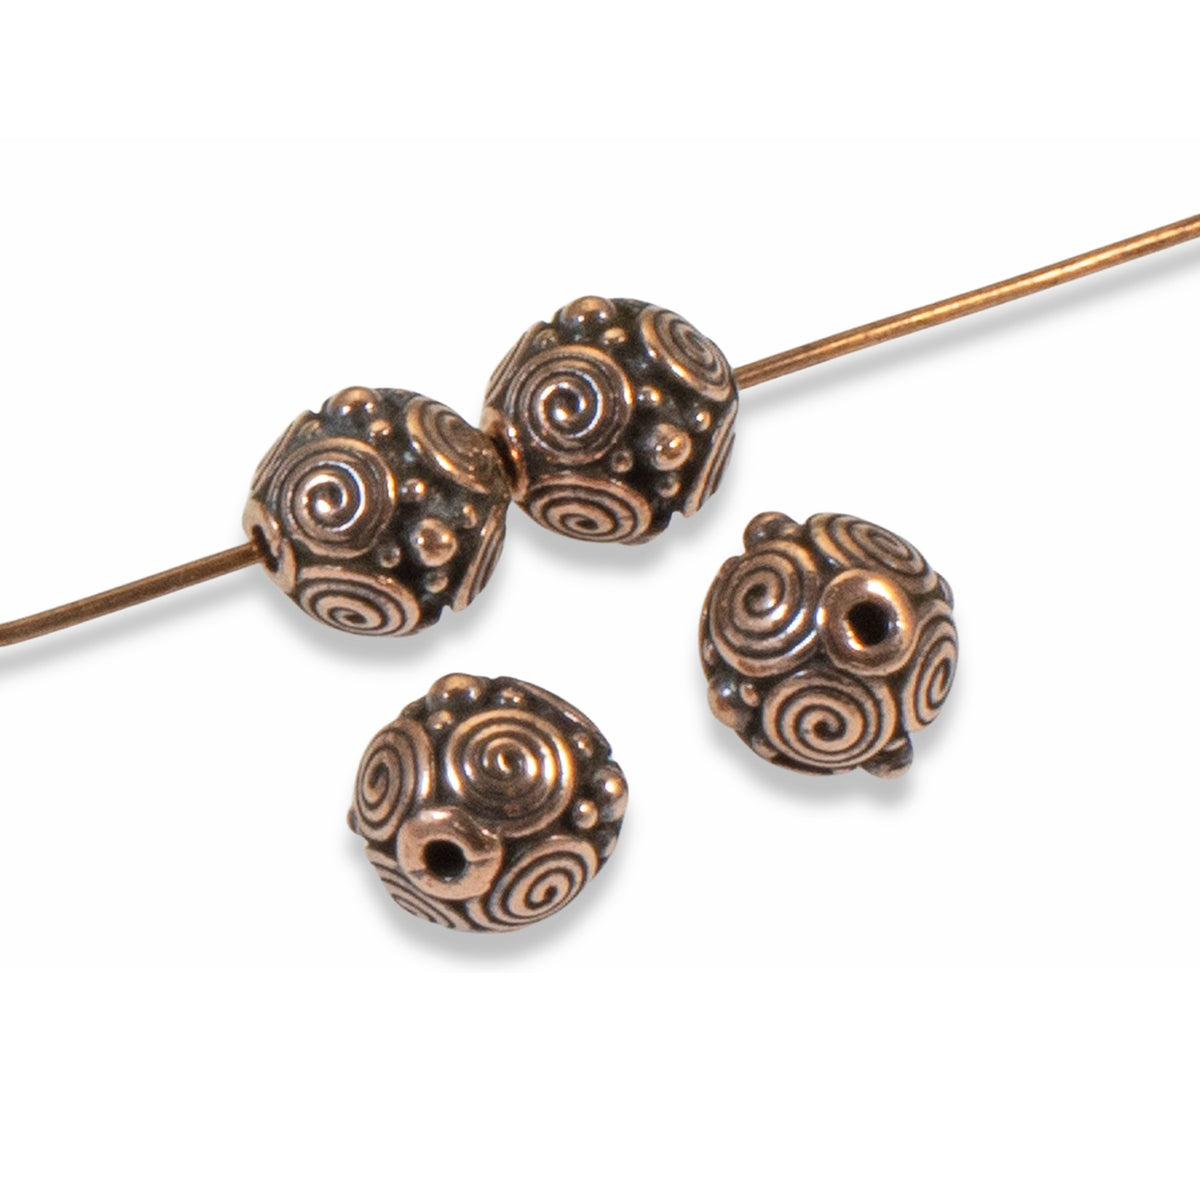 5 Large Copper Spiral Pinch Bail, Tierracast Jewelry Bails for Pendants,  Decorative Pendant Holder for DIY Jewelry Making 